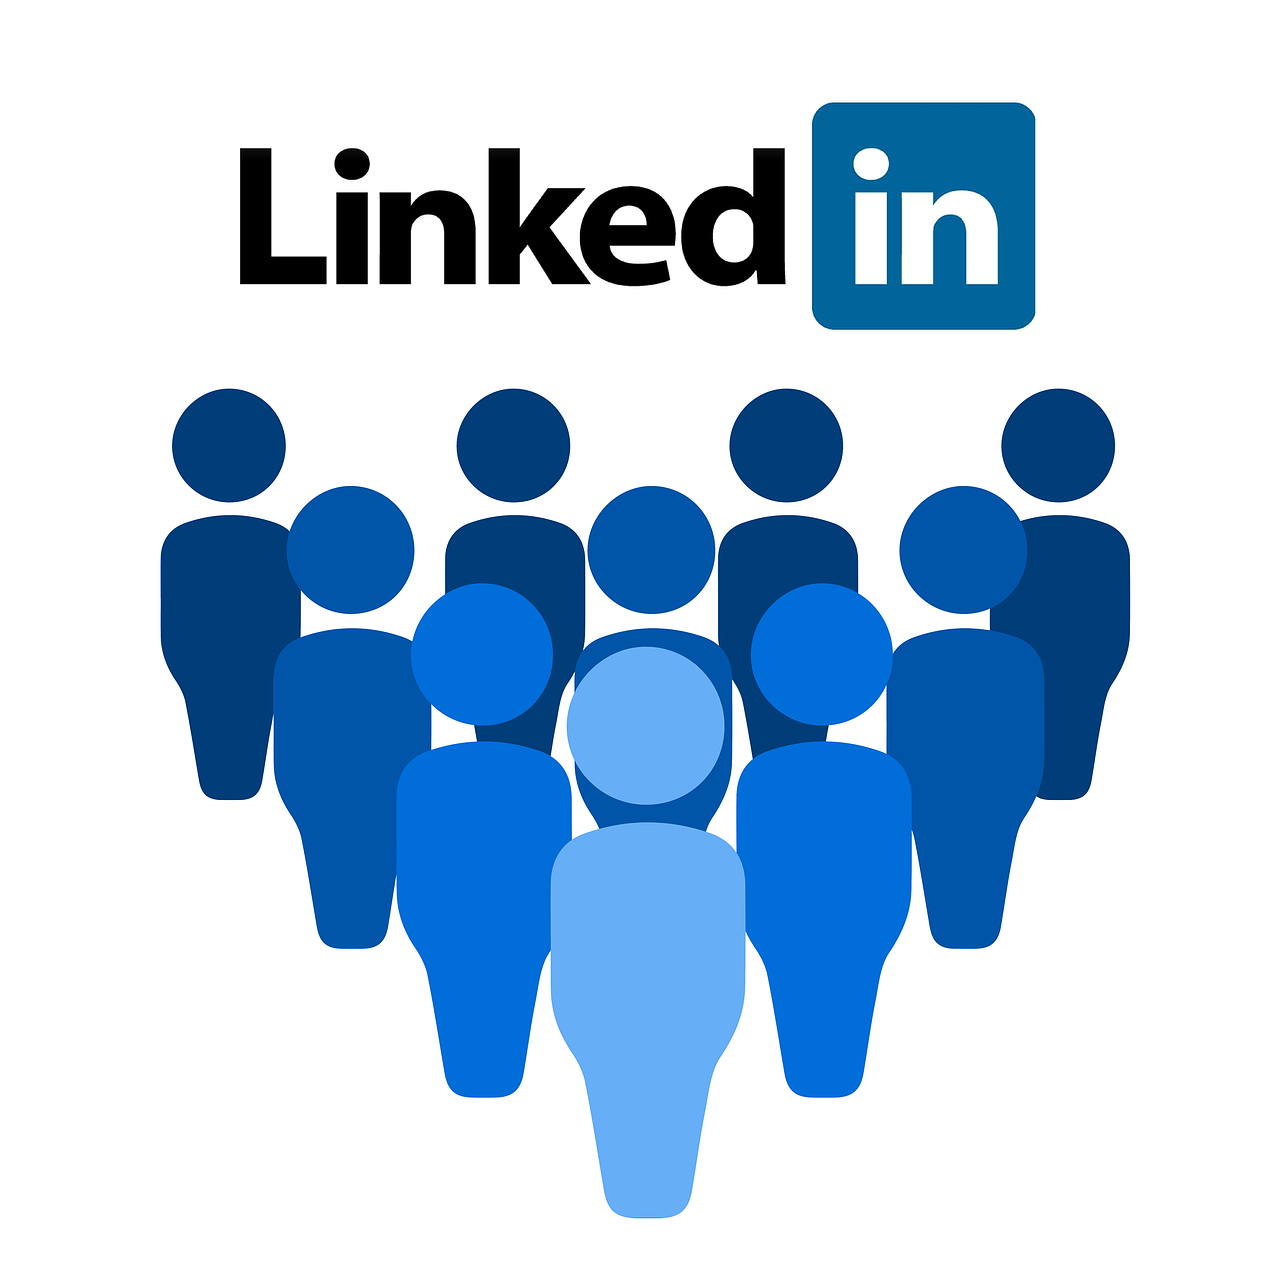 What Should I Be Adding To My LinkedIn Profile? | Executive Resume Services